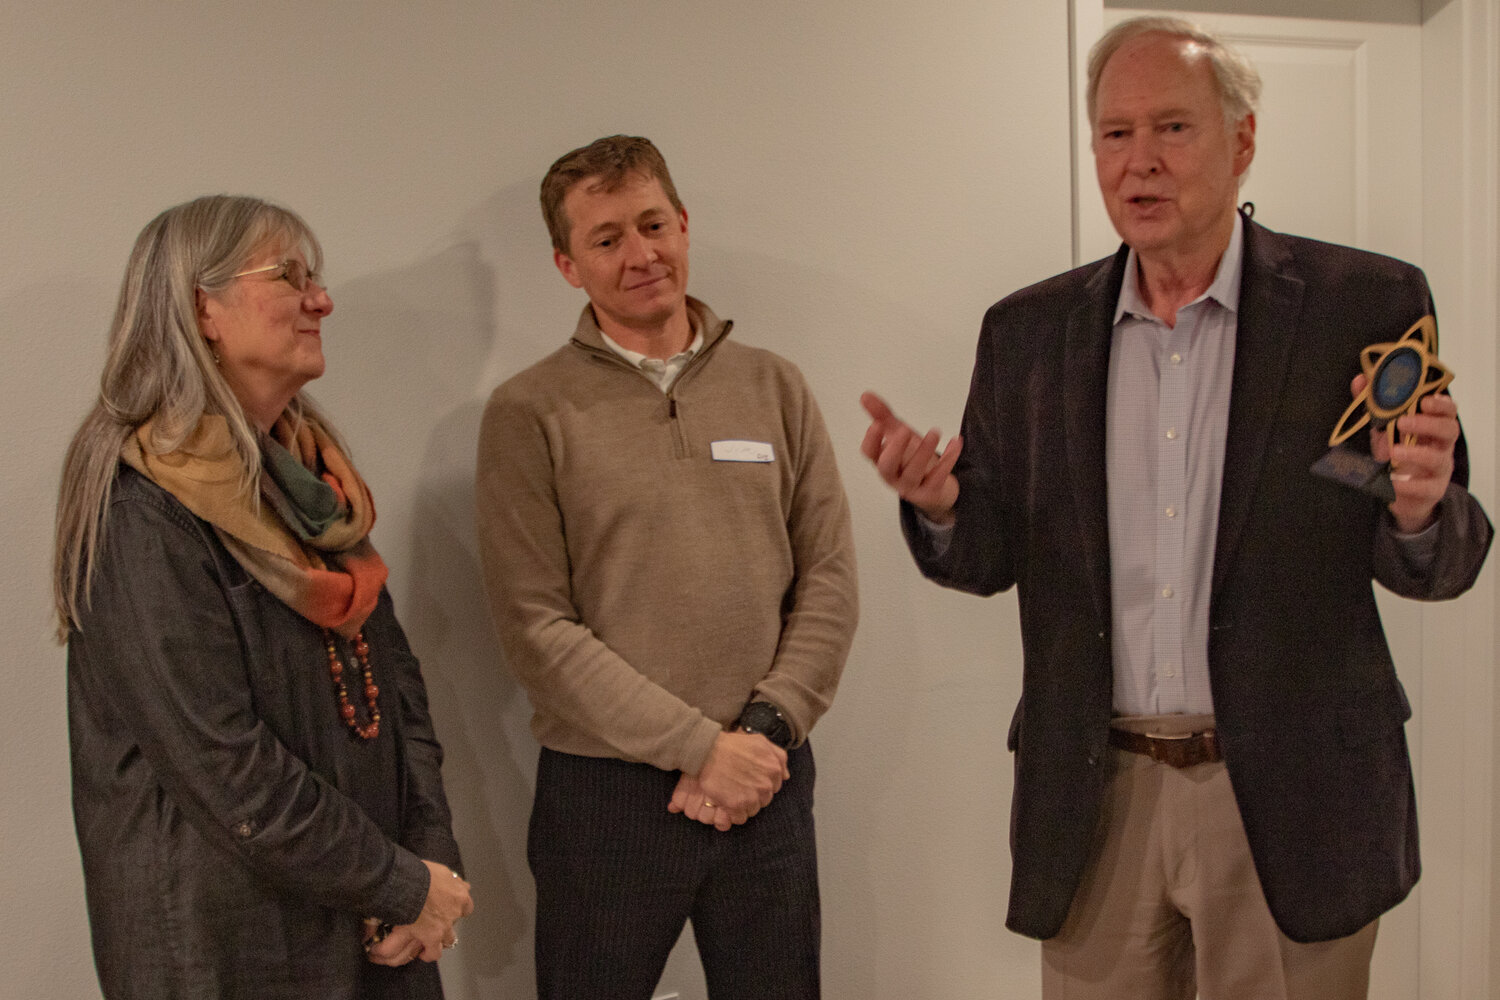 CHI managing members Joel Crosby, right, and Jim Lind, center, thank Centralia College Foundation executive director Christine Fossett for her help in completing the CHI apartments during an open house on Tuesday, Nov. 7.